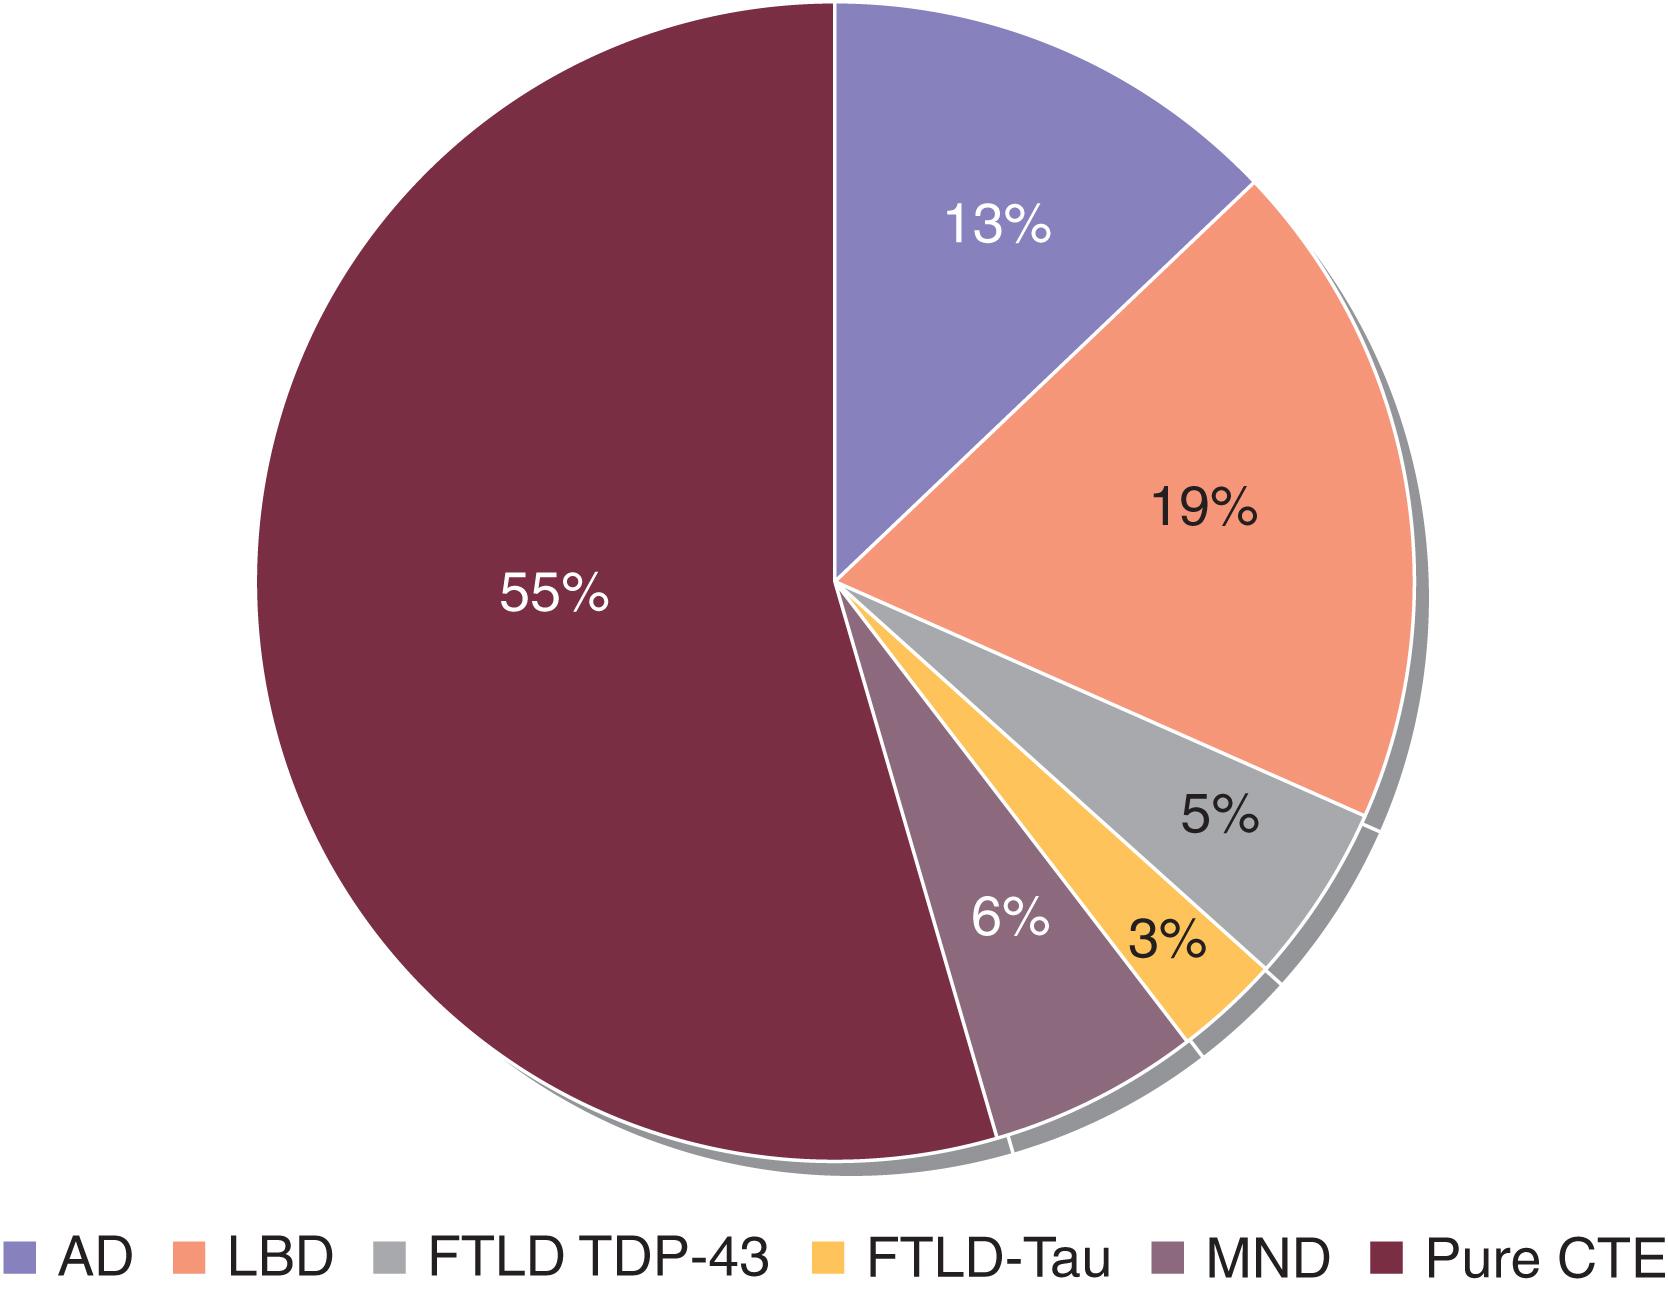 Fig. 15.2, Neuropathologic diagnoses among a cohort of 177 football players from the Veterans Affairs-Boston University-Concussion Legacy Foundation brain bank who were diagnosed with chronic traumatic encephalopathy (CTE), Alzheimer’s disease (AD) , Lewy body disease (LBD) , frontotemporal lobar degeneration from TDP-43 (FTLD TDP-43) , frontotemporal lobar degeneration from tau (FTLD-Tau) , and motor neuron disease (MND) by autopsy. Some 55% exhibited pure CTE pathology, and the remaining cases exhibited overlap with other neurodegenerative conditions, including Alzheimer’s disease, Lewy body disease, frontotemporal lobar degeneration with transactive response DNA binding protein 43, frontotemporal lobar degeneration with tau pathology (FTLD-Tau), and motor neuron disease.